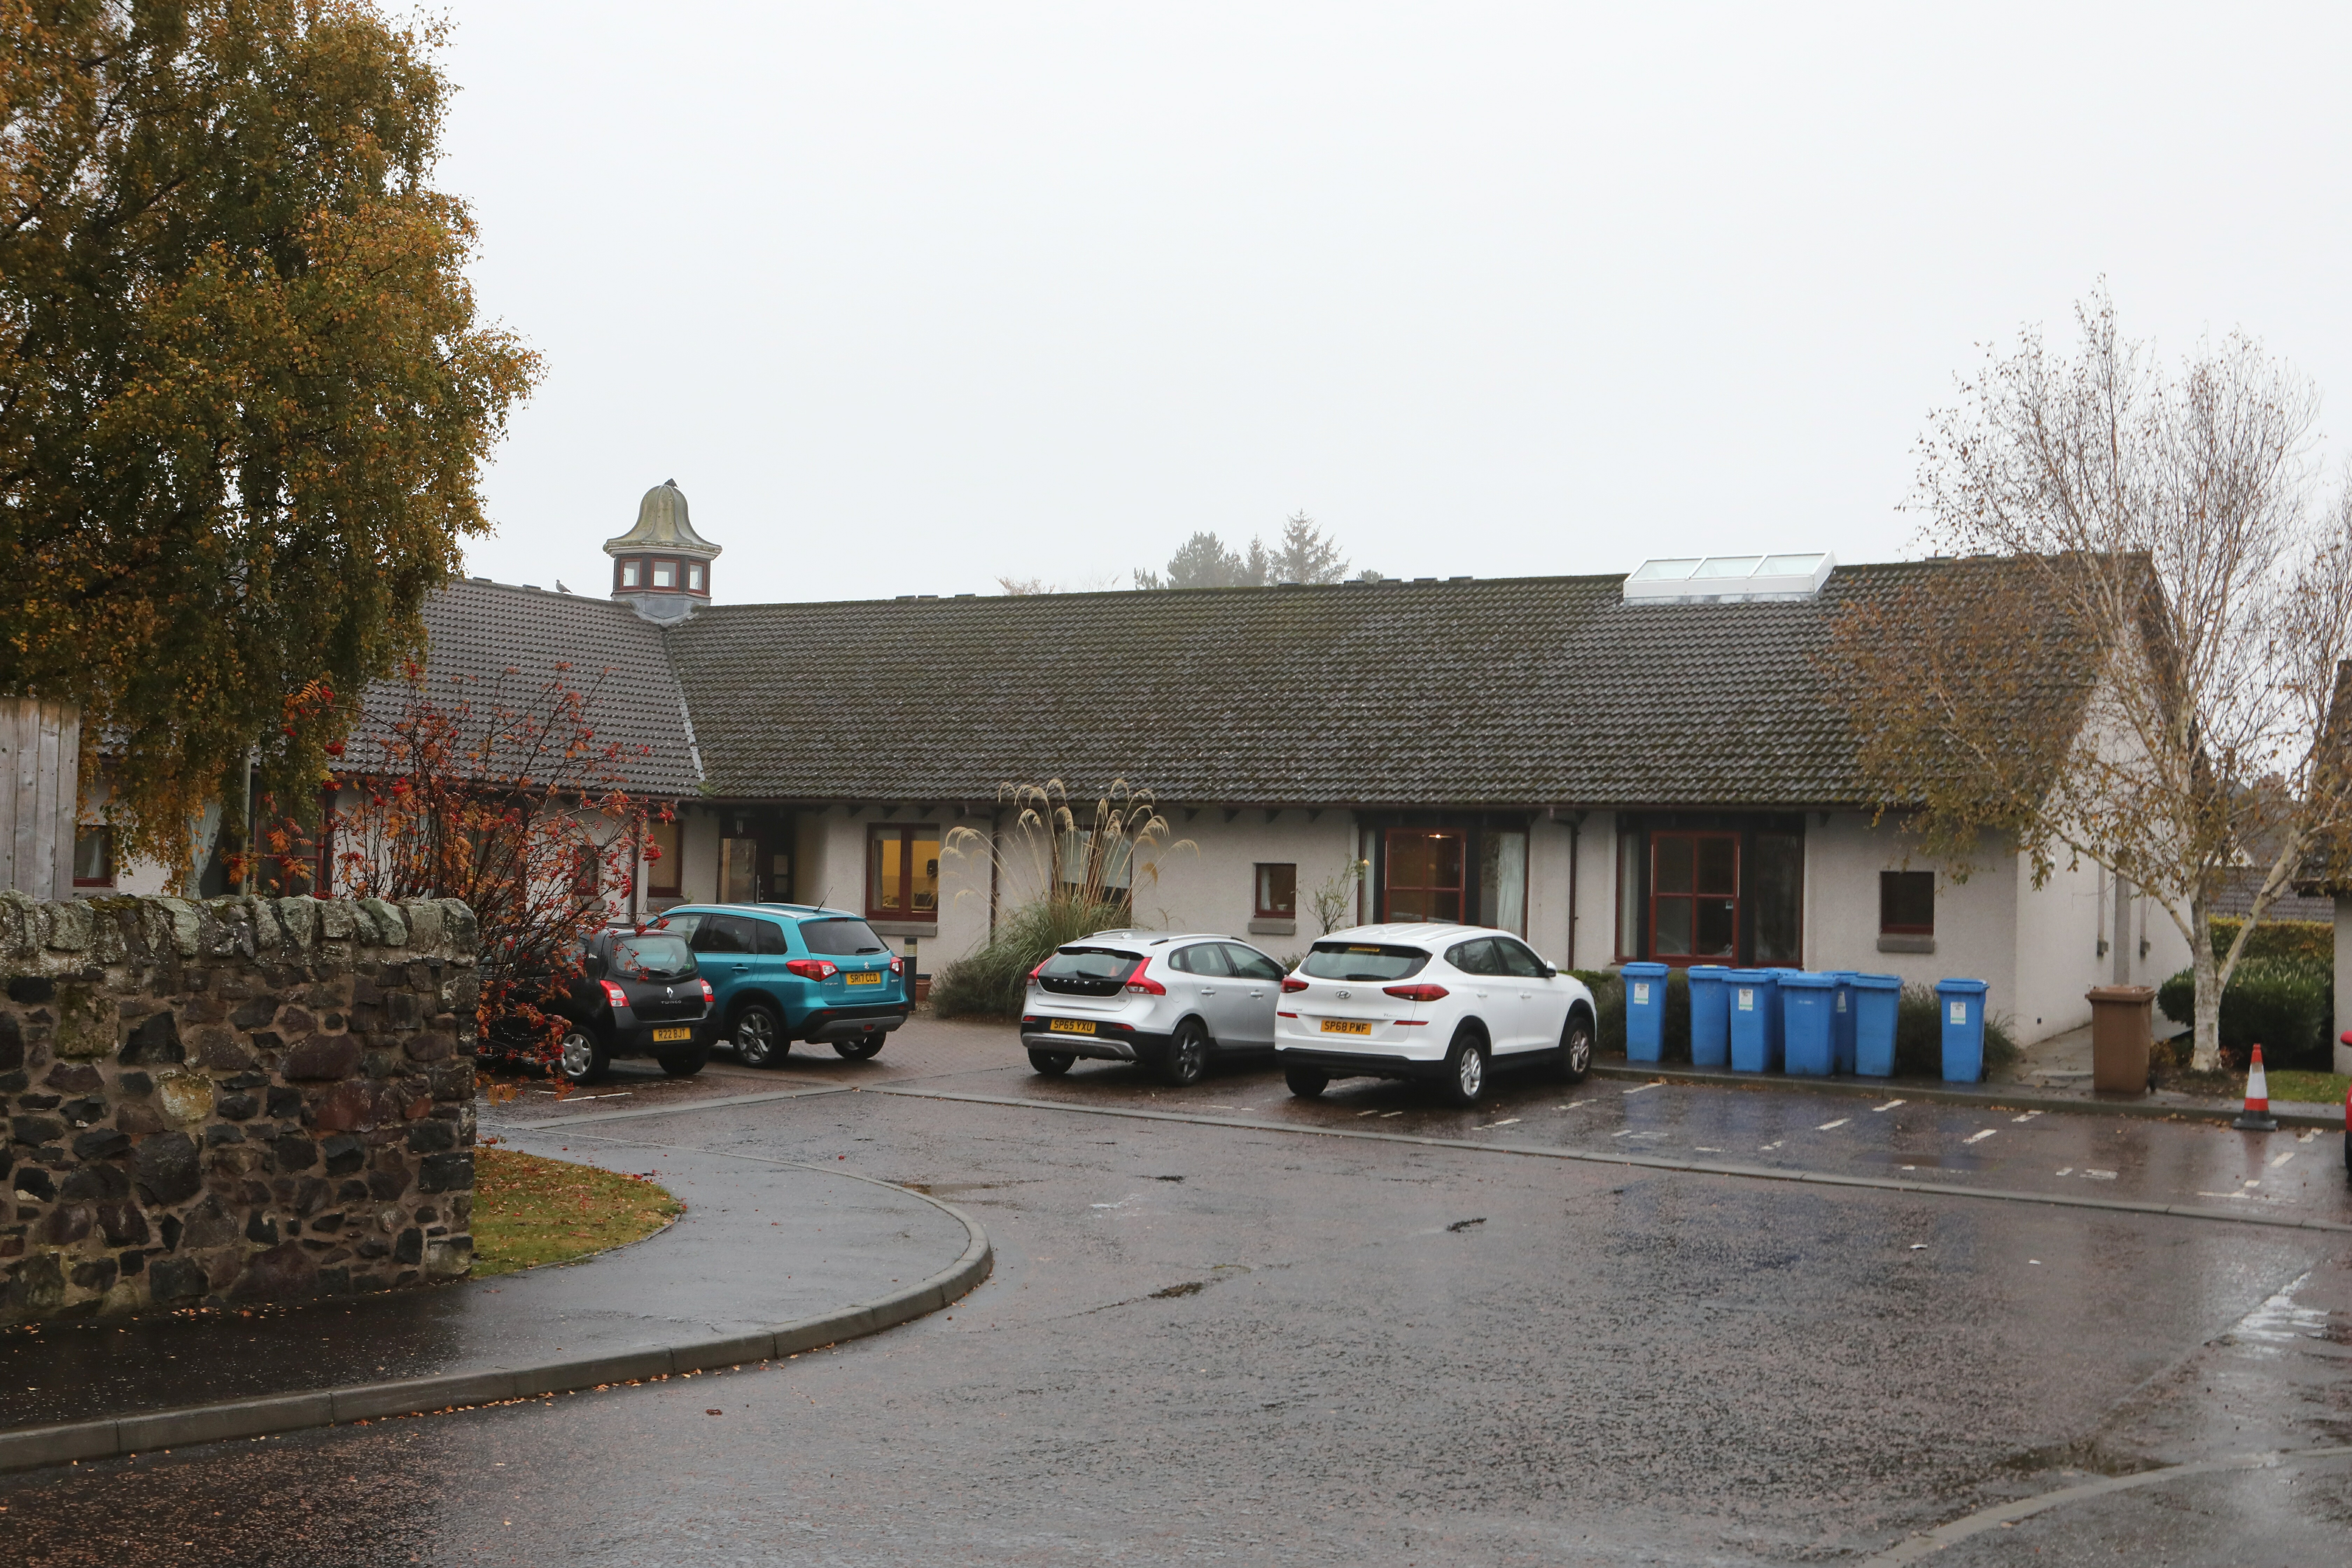 Servite Court Care Home in Redcroft Place in Leuchars is rumoured to be closing,